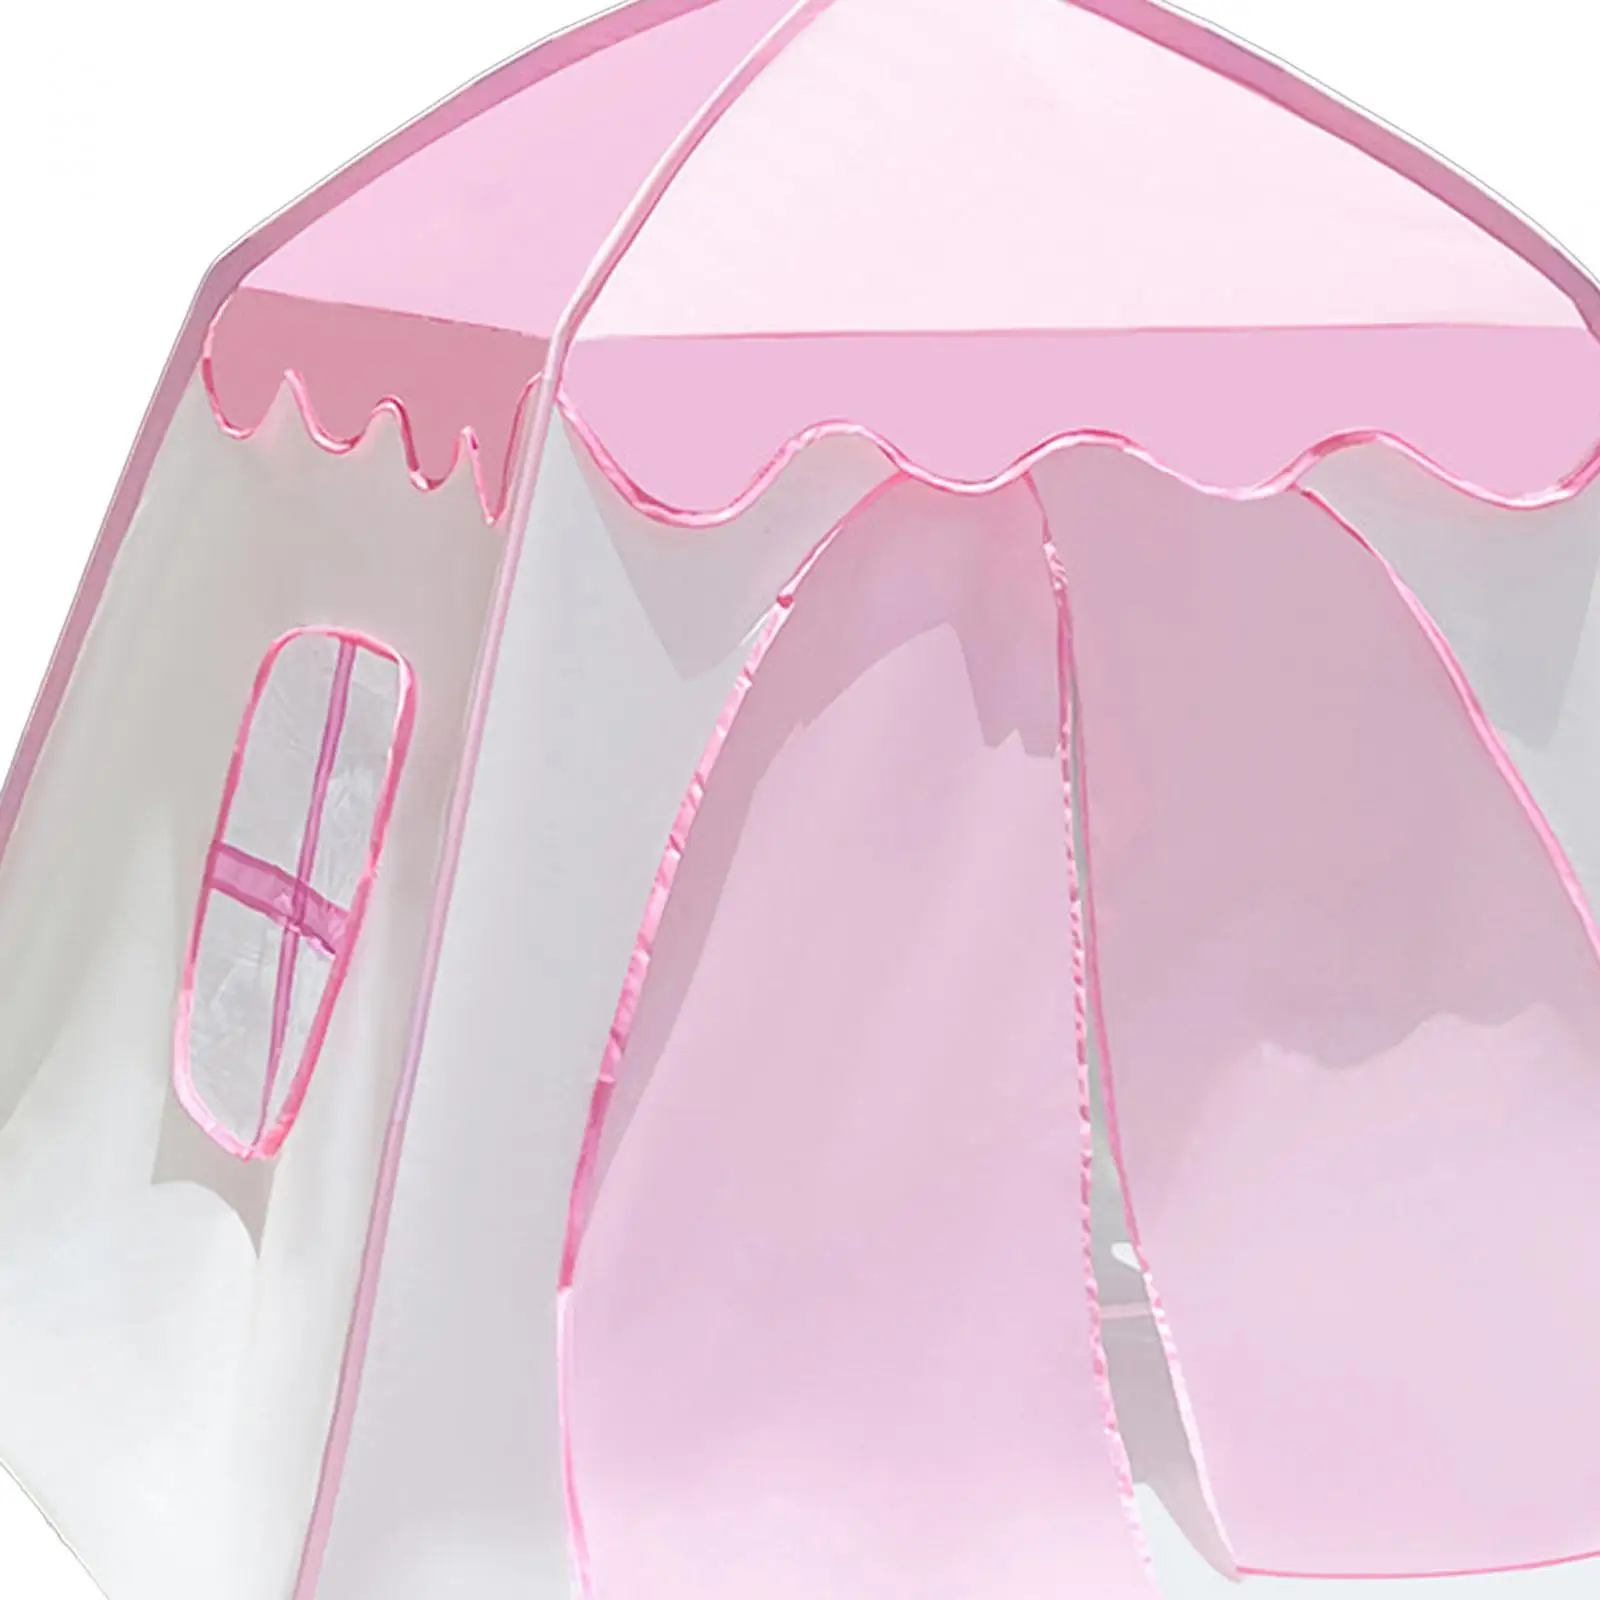 Kids Tent Girls Tent Gift Playhouse Tent Indoor and Outdoor Games Indoor Toy House Breathable for Toddlers Princess Tent